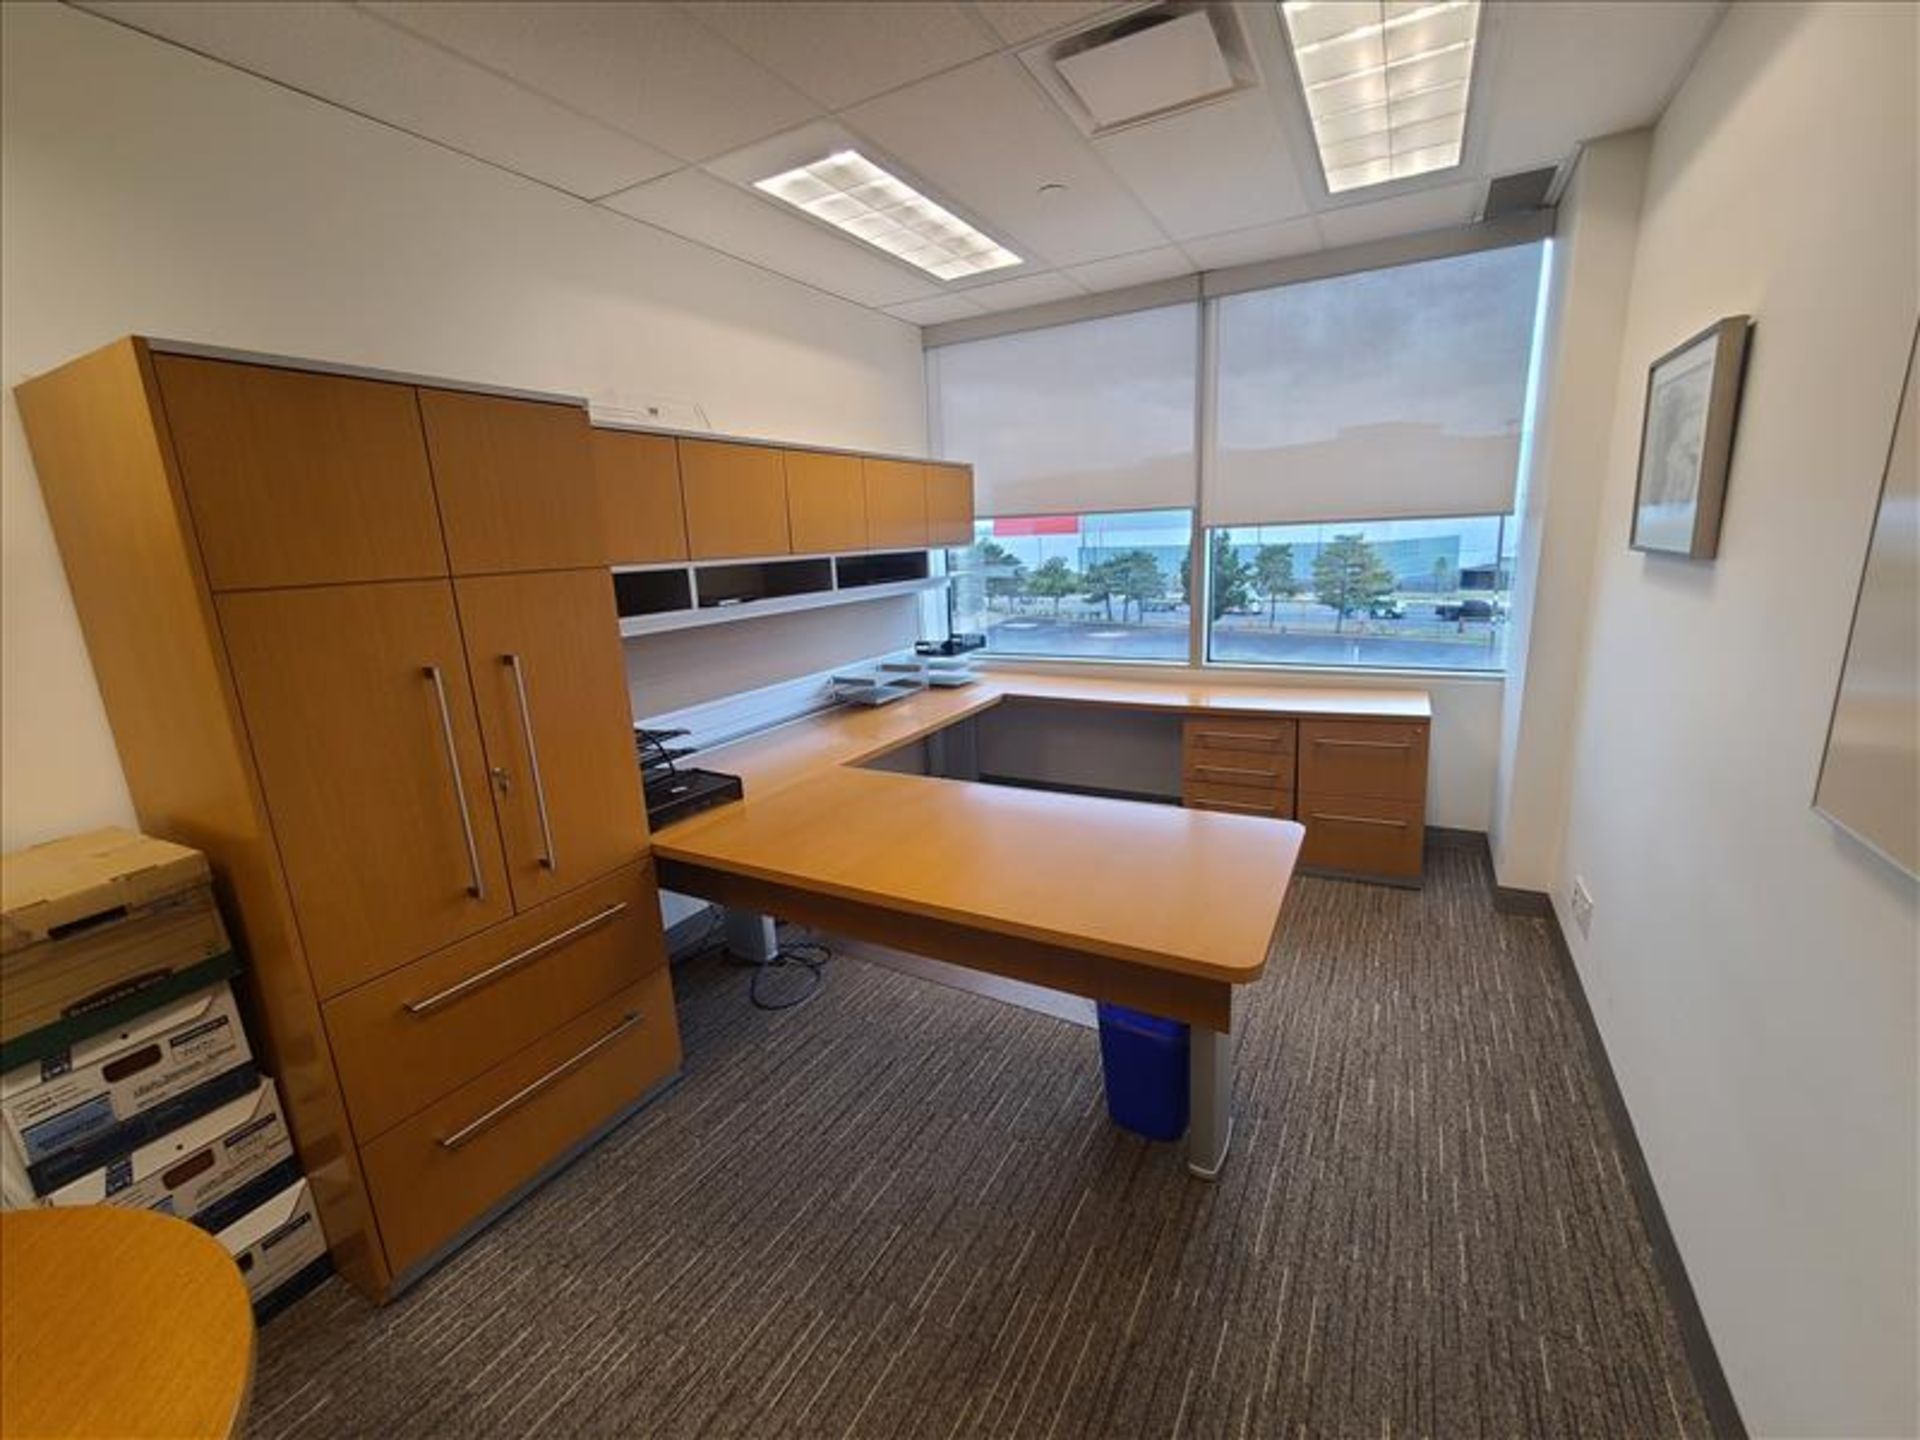 Private Office Suite incl; front, back and side desk, (1) Upper mounted storage cabinet, (1)